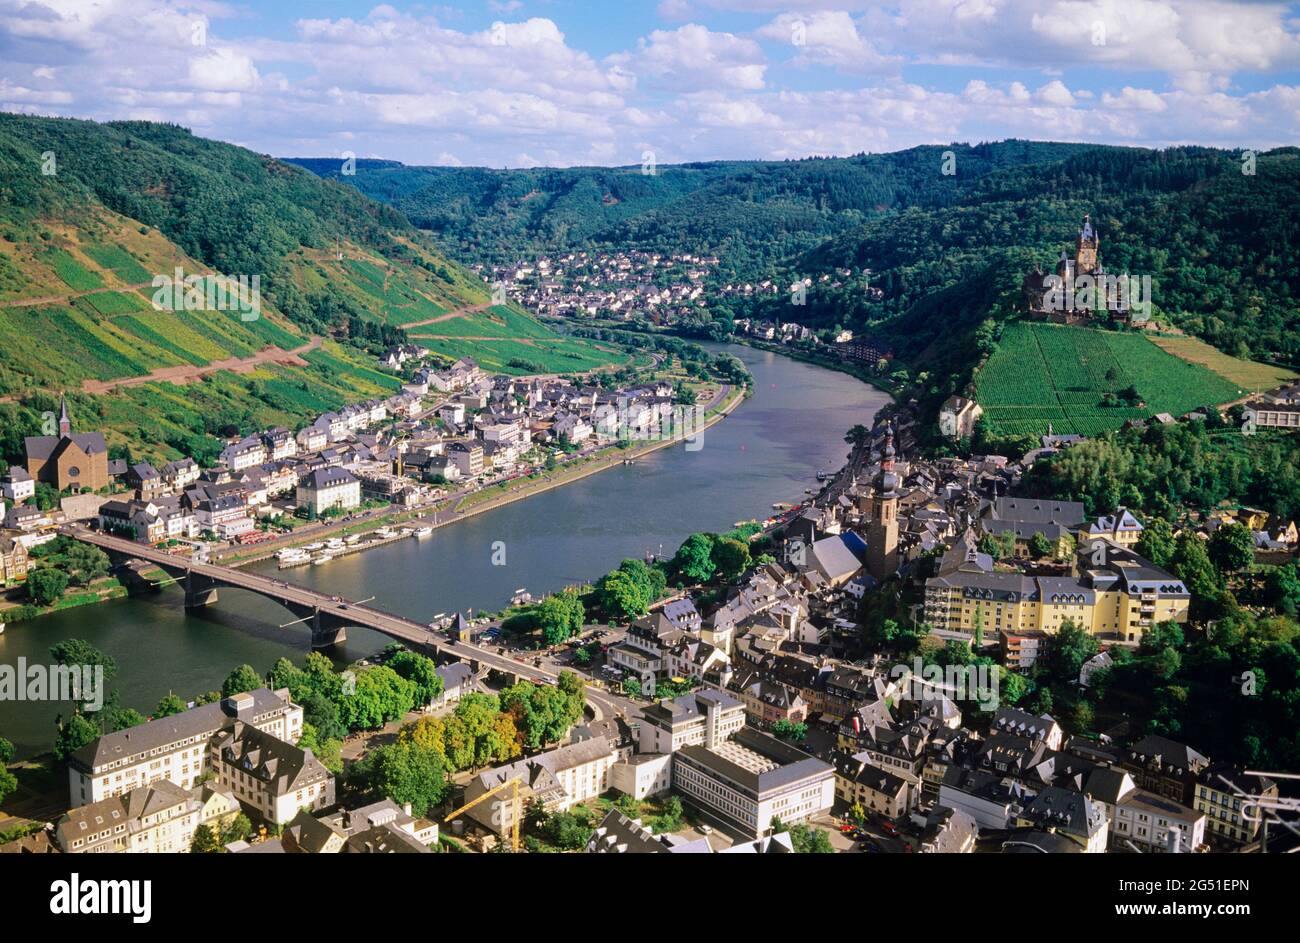 Aerial view of view of town and Mosel River, Cochem, Rhineland-Palatinate, Germany Stock Photo